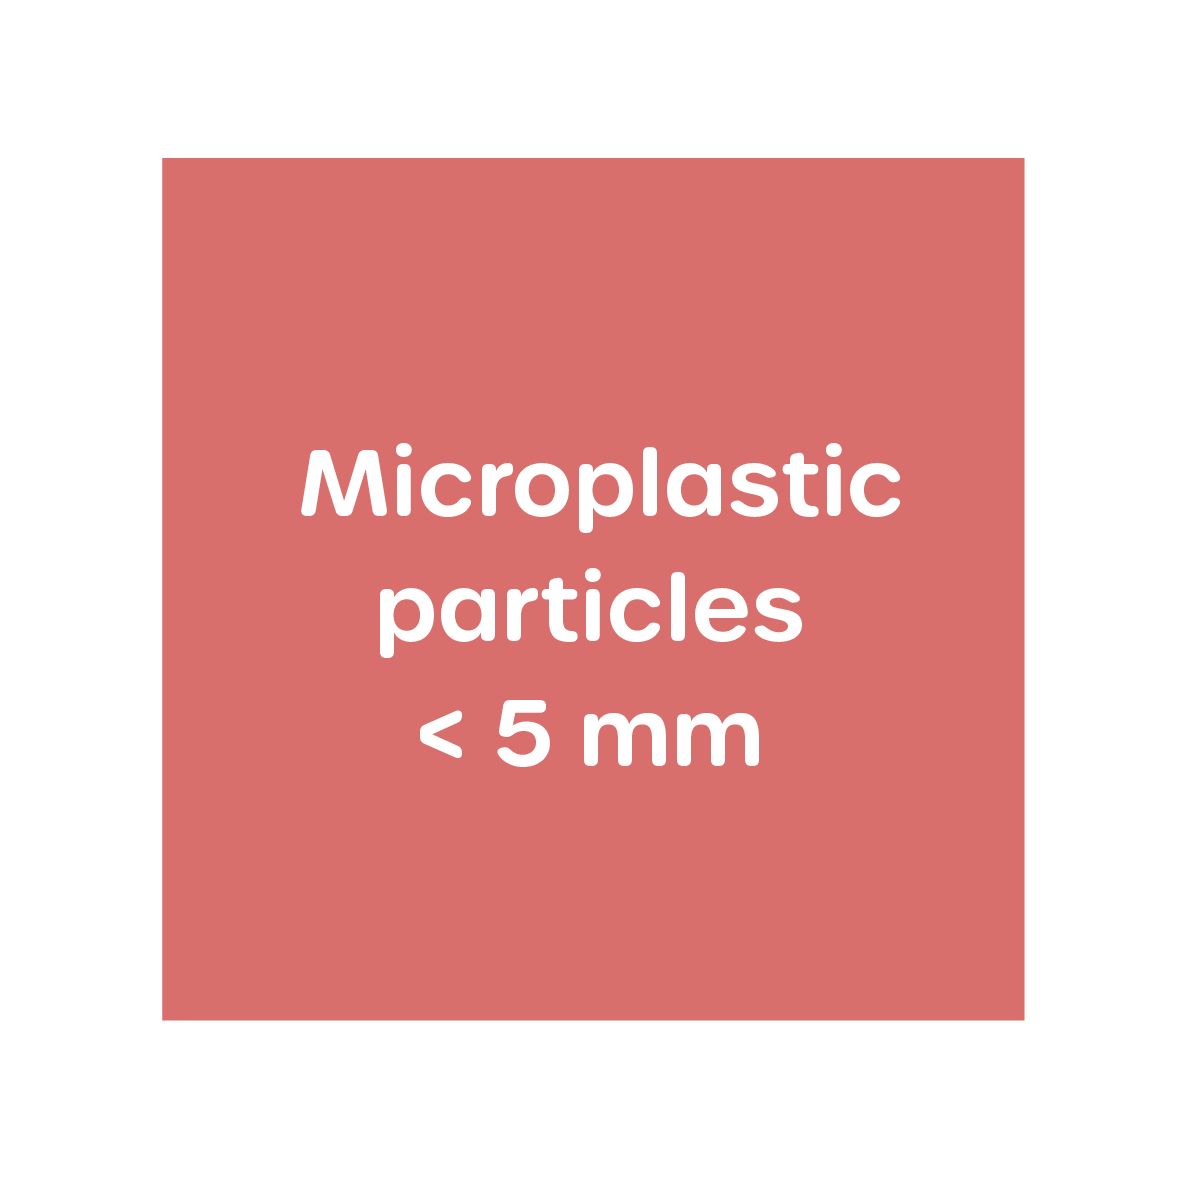 Particles smaller than 5 mm